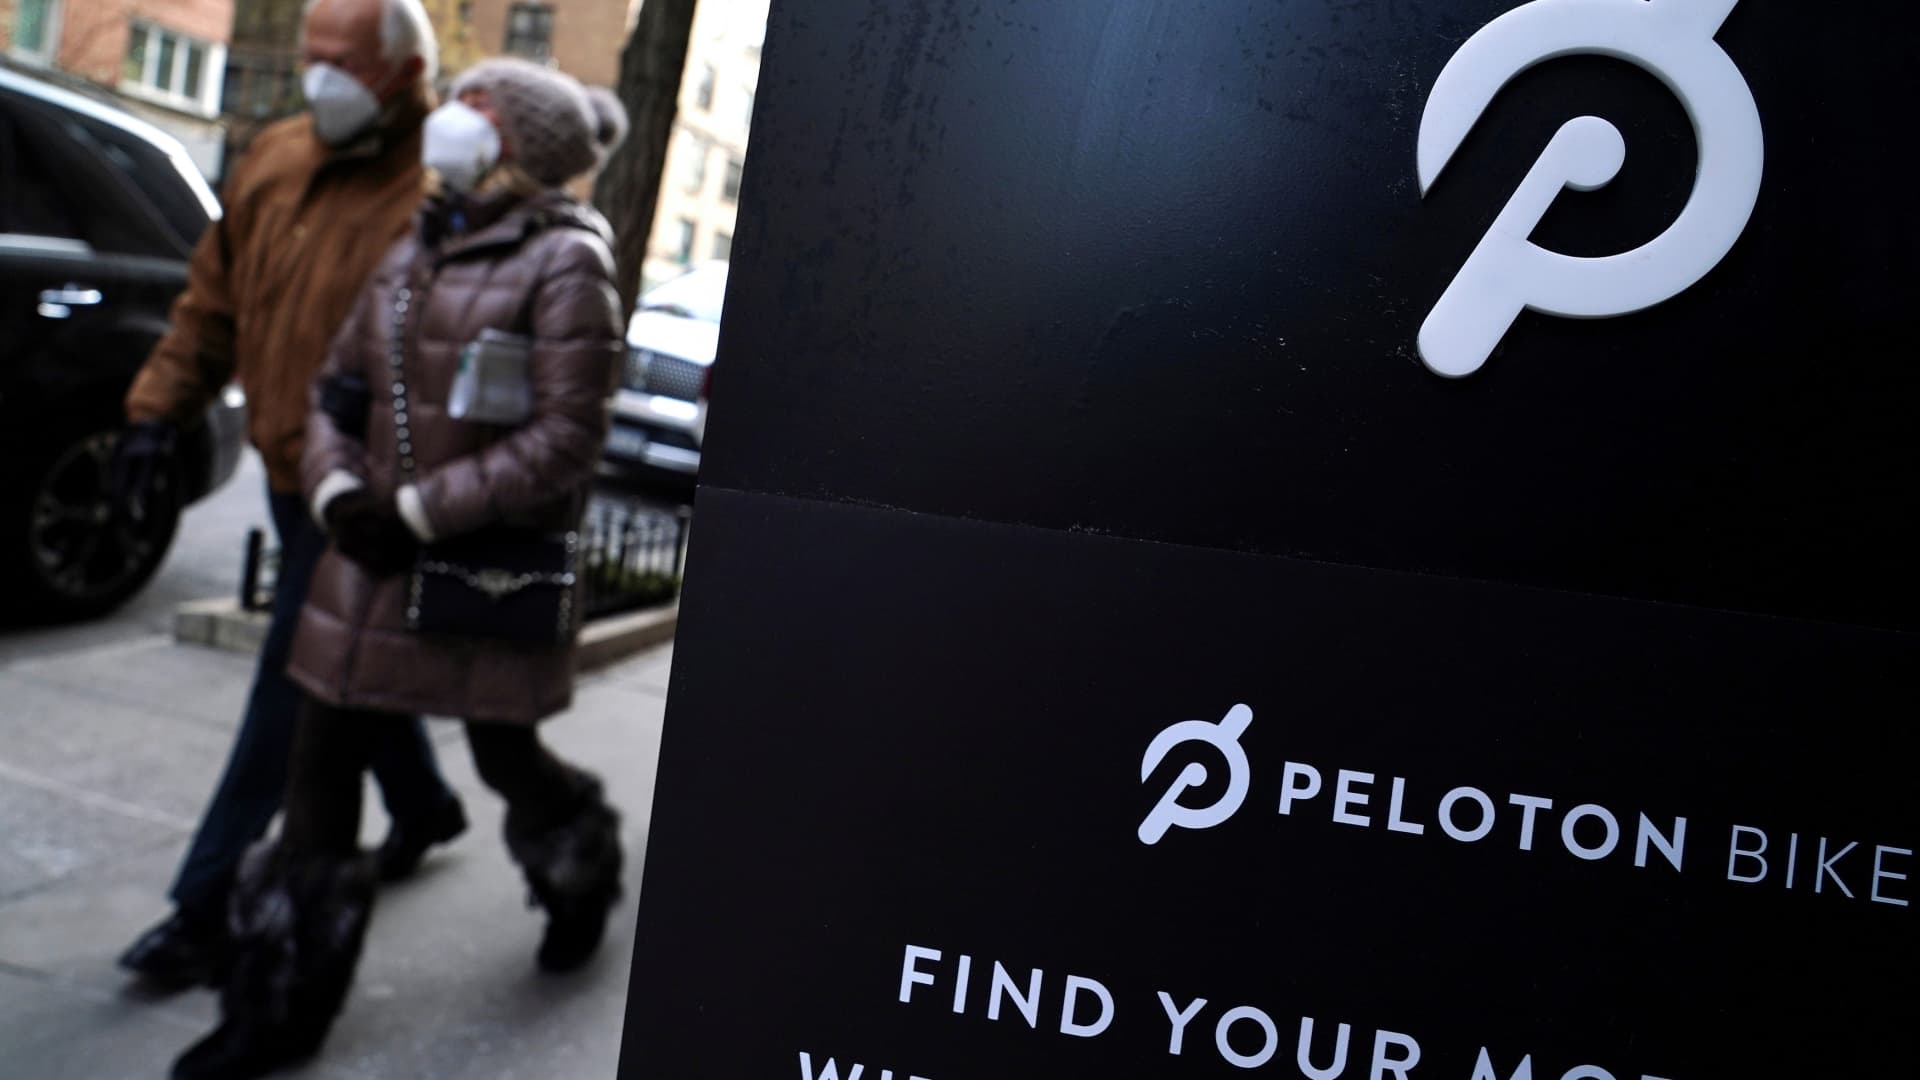 Peloton quietly drops unlimited free app membership because it failed to bring in paid subscribers